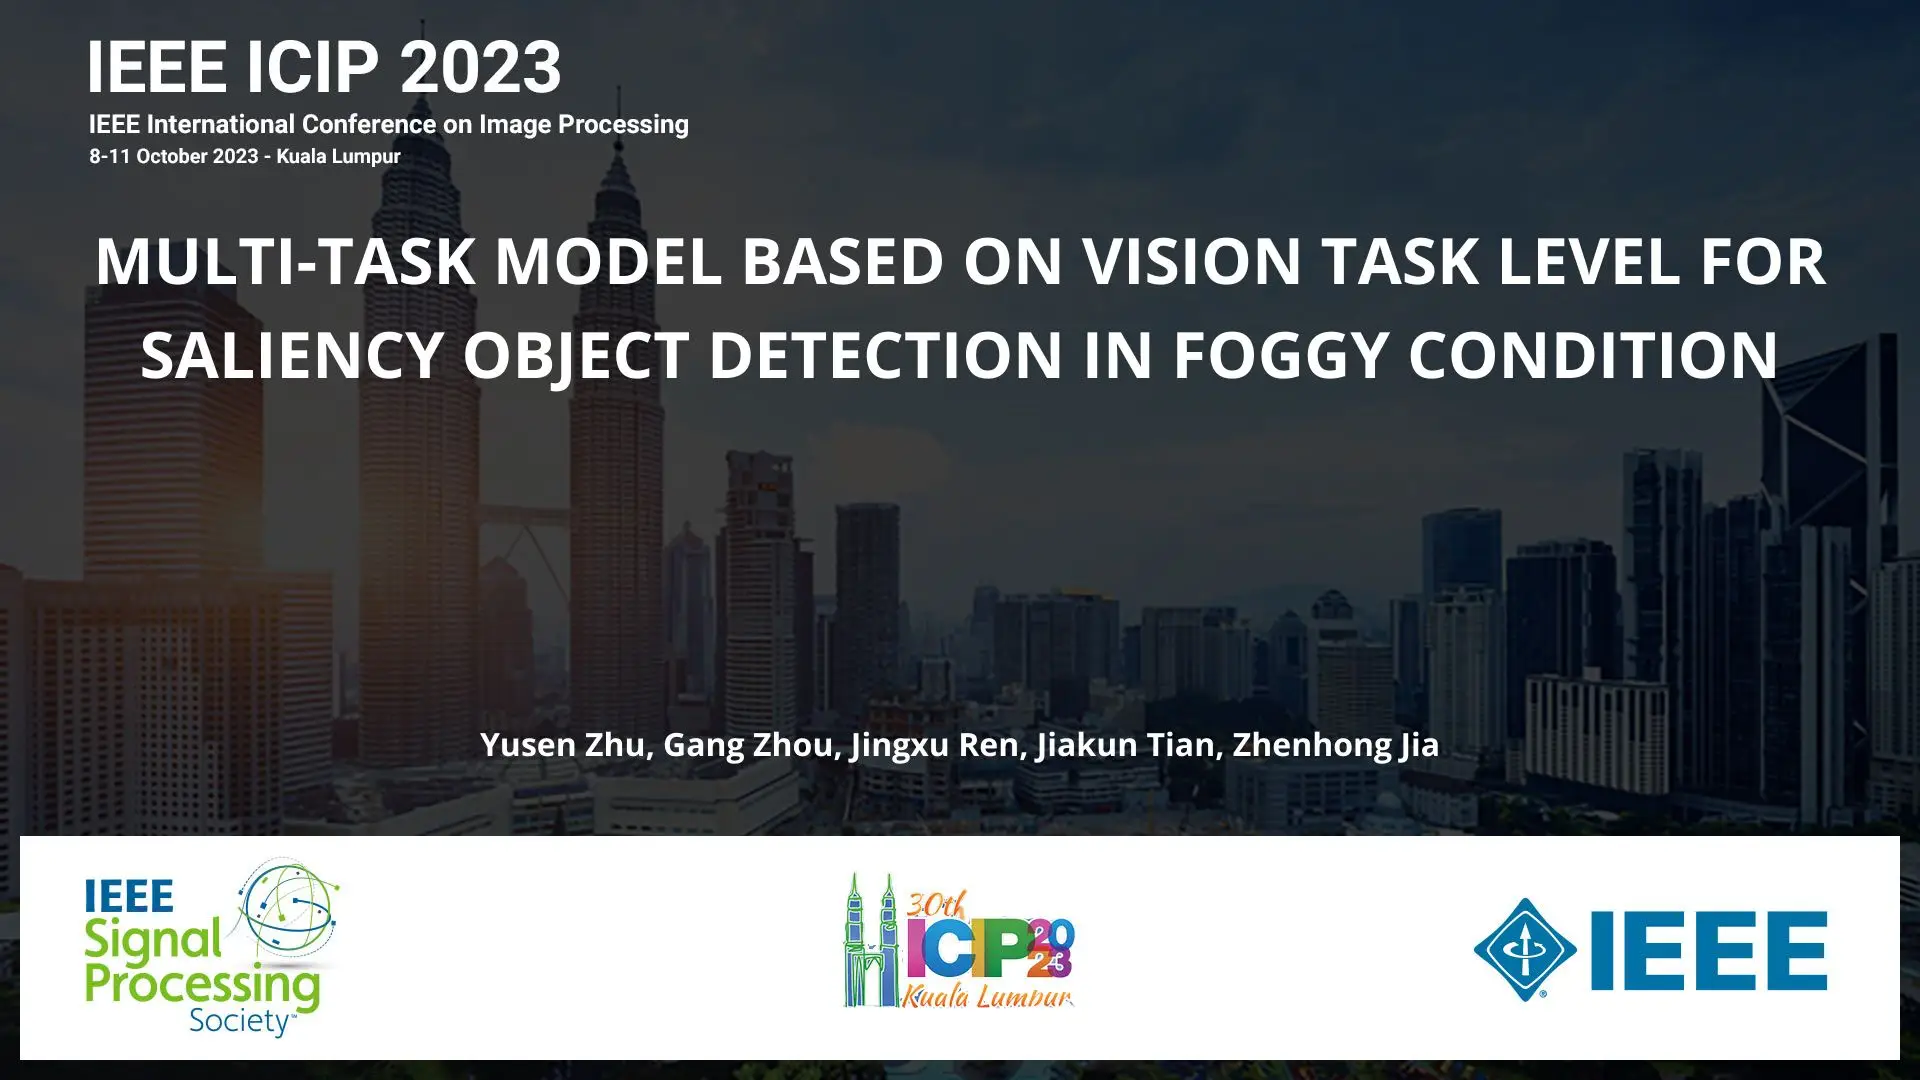 MULTI-TASK MODEL BASED ON VISION TASK LEVEL FOR SALIENCY OBJECT DETECTION IN FOGGY CONDITION